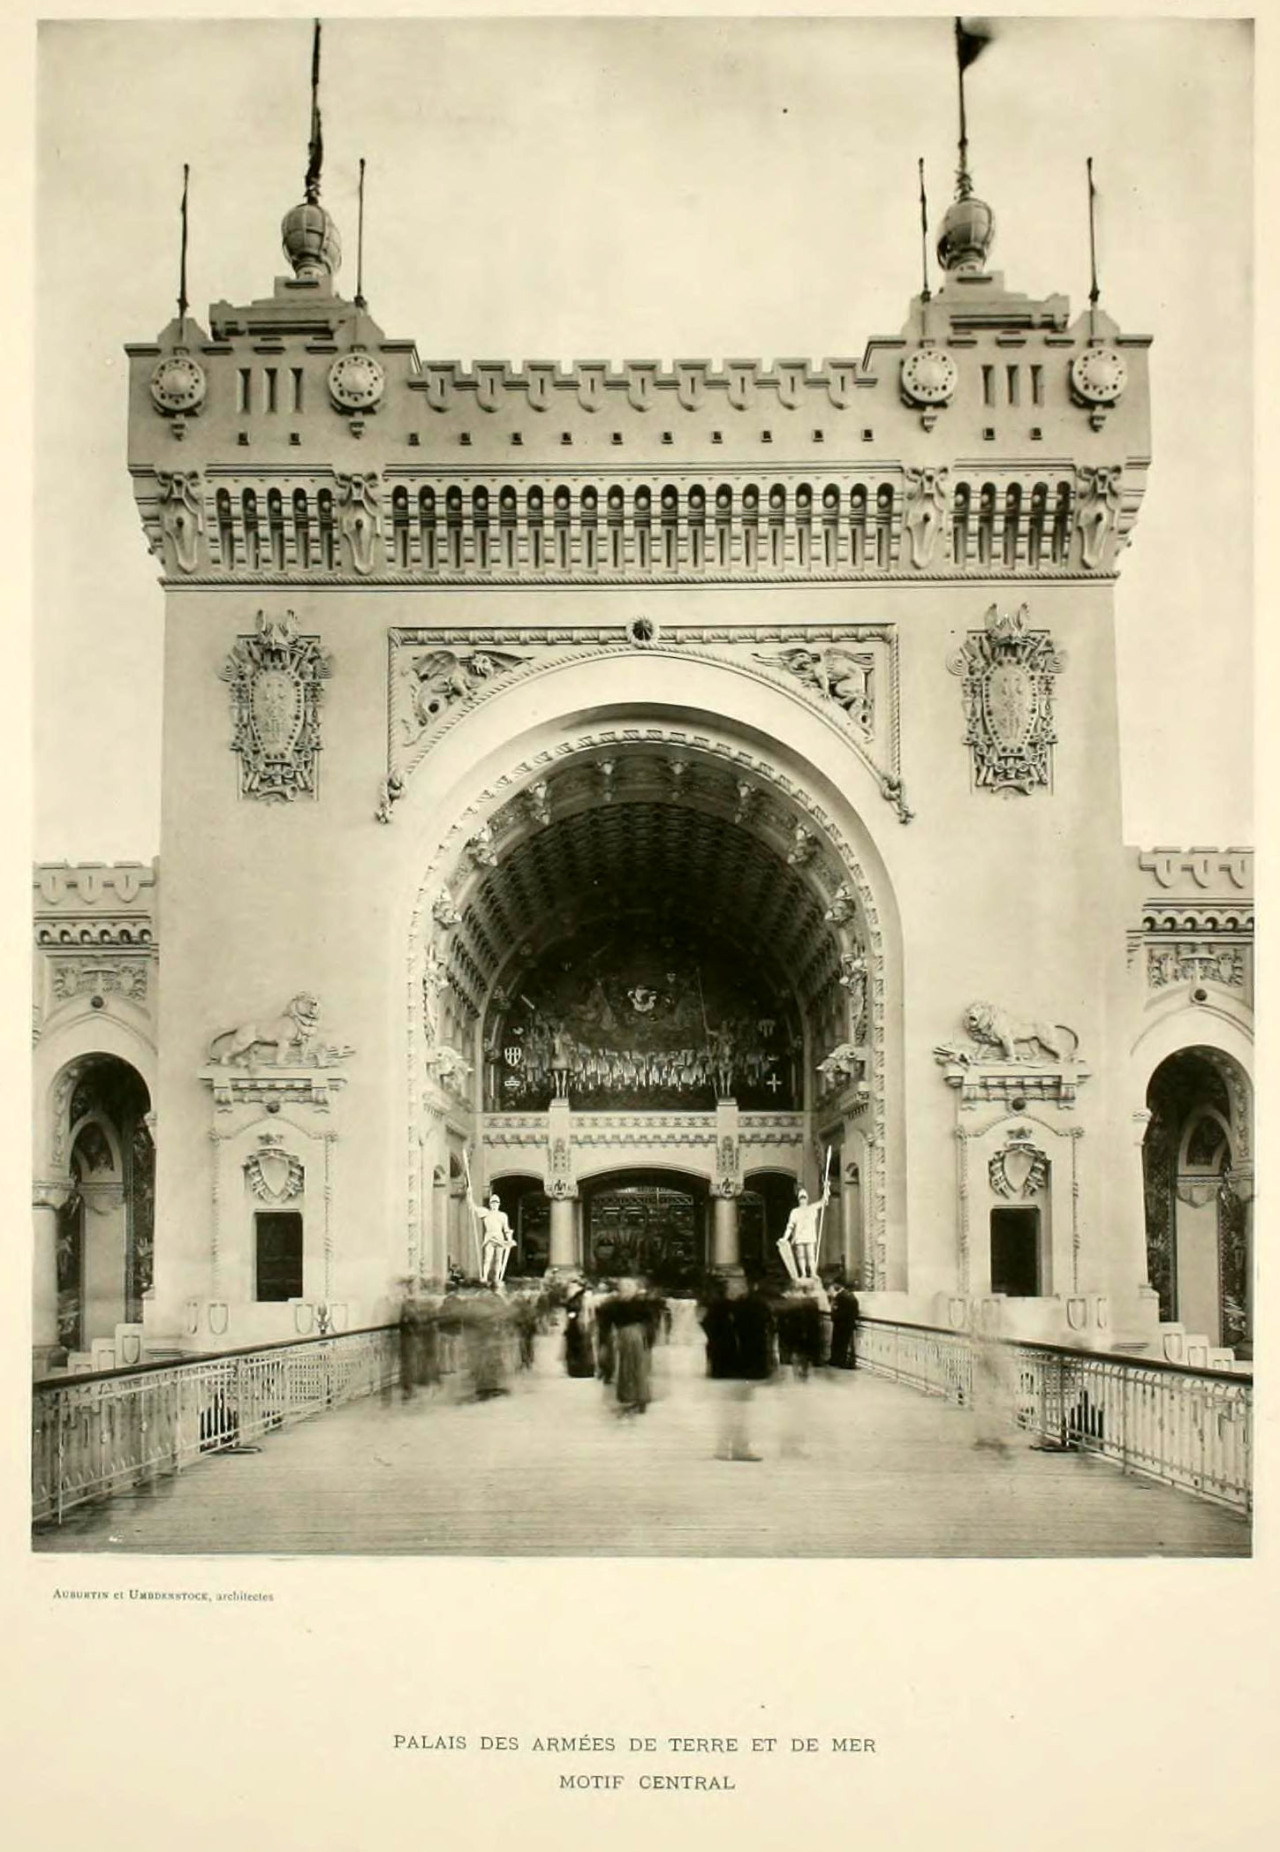 The Army and Navy Pavilion at the 1900 Exposition Universelle, Paris